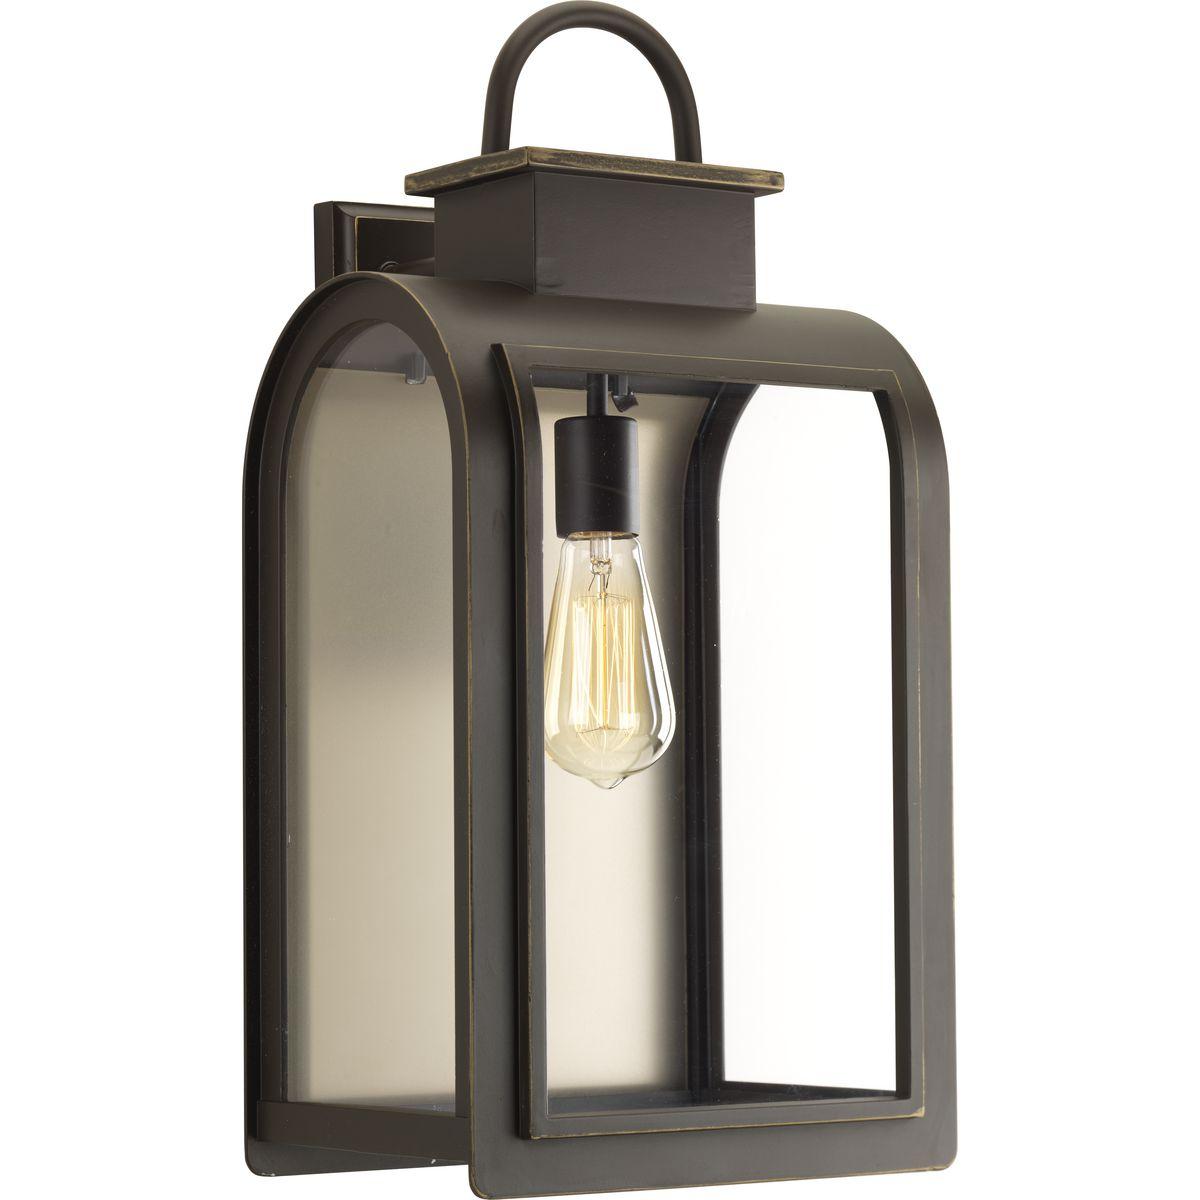 Hubbell P6032-108 One-light large wall lantern in a Cape Cod-inspired frame pays homage to a classic nautical style. Light output and geometric forms offer visual interest to outdoor exteriors. Clear glass windows are paired with a unique umber reflector panel that provide